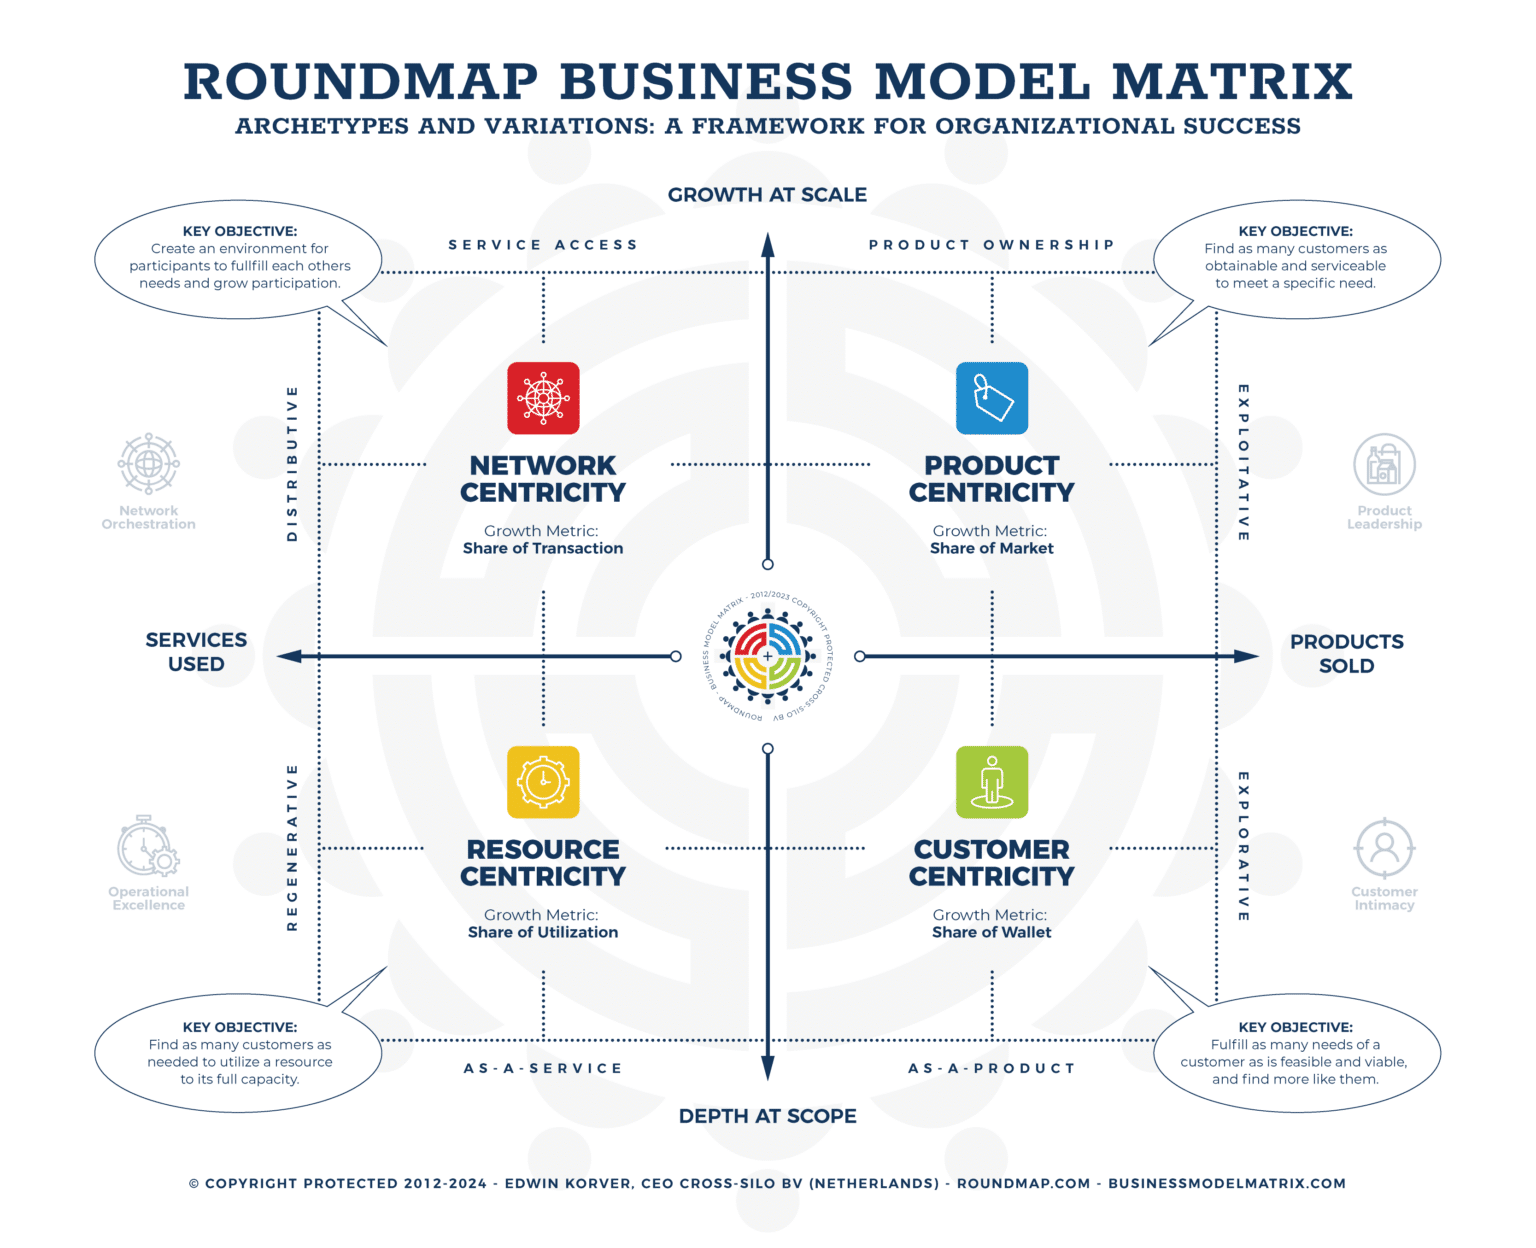 RoundMap_Business_Model_Matrix_Revised_Copyright_Protected